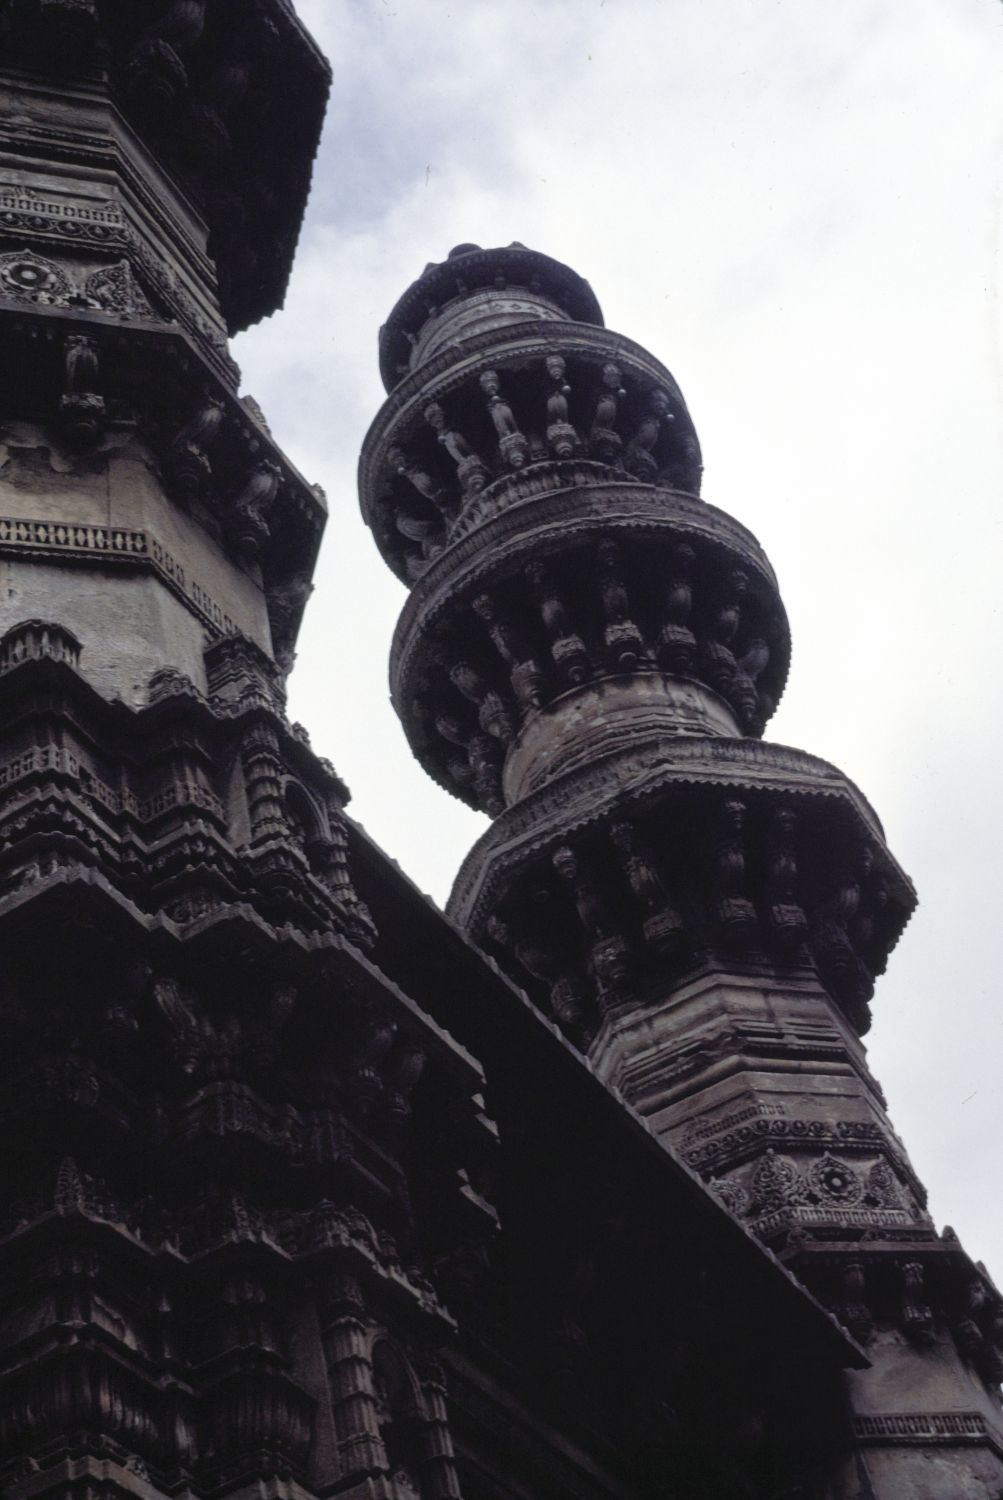 View of minarets from below.